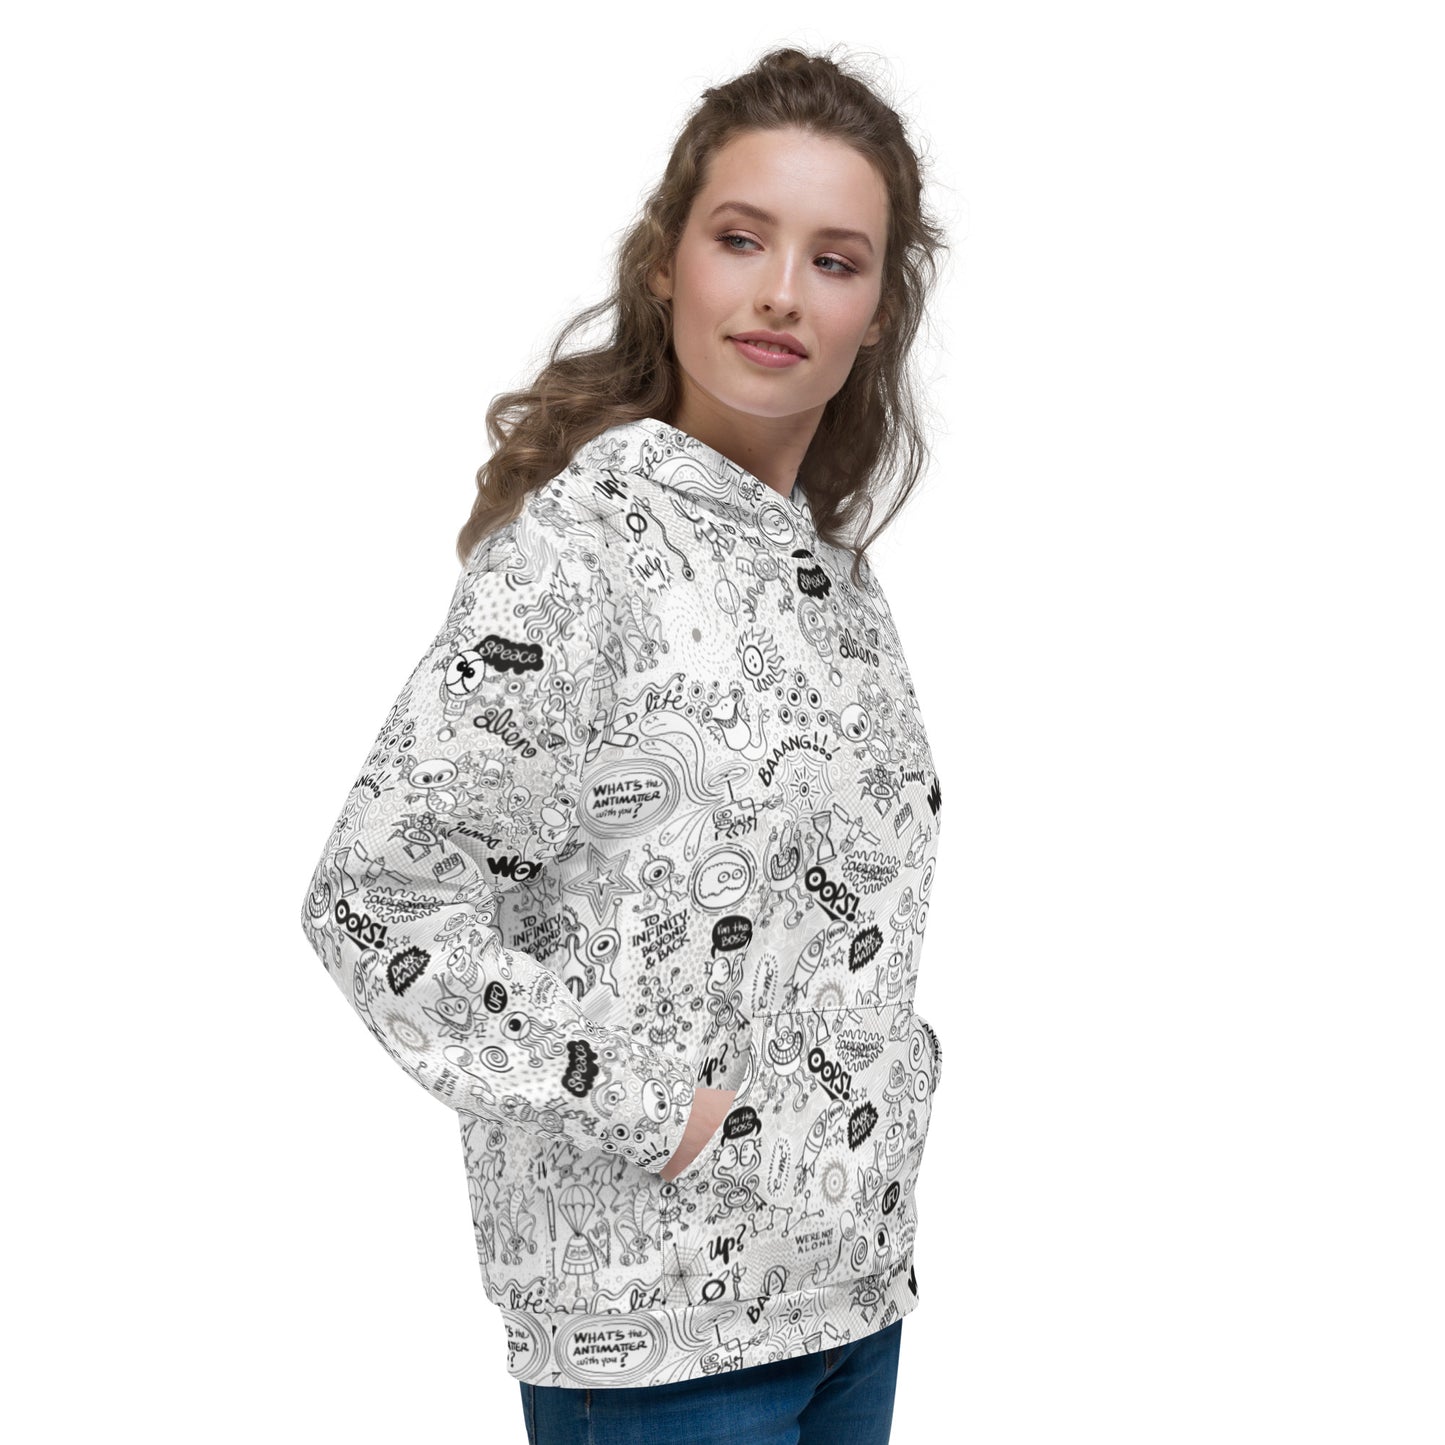 Celebrating the most comprehensive Doodle art of the universe Unisex Hoodie. Overview